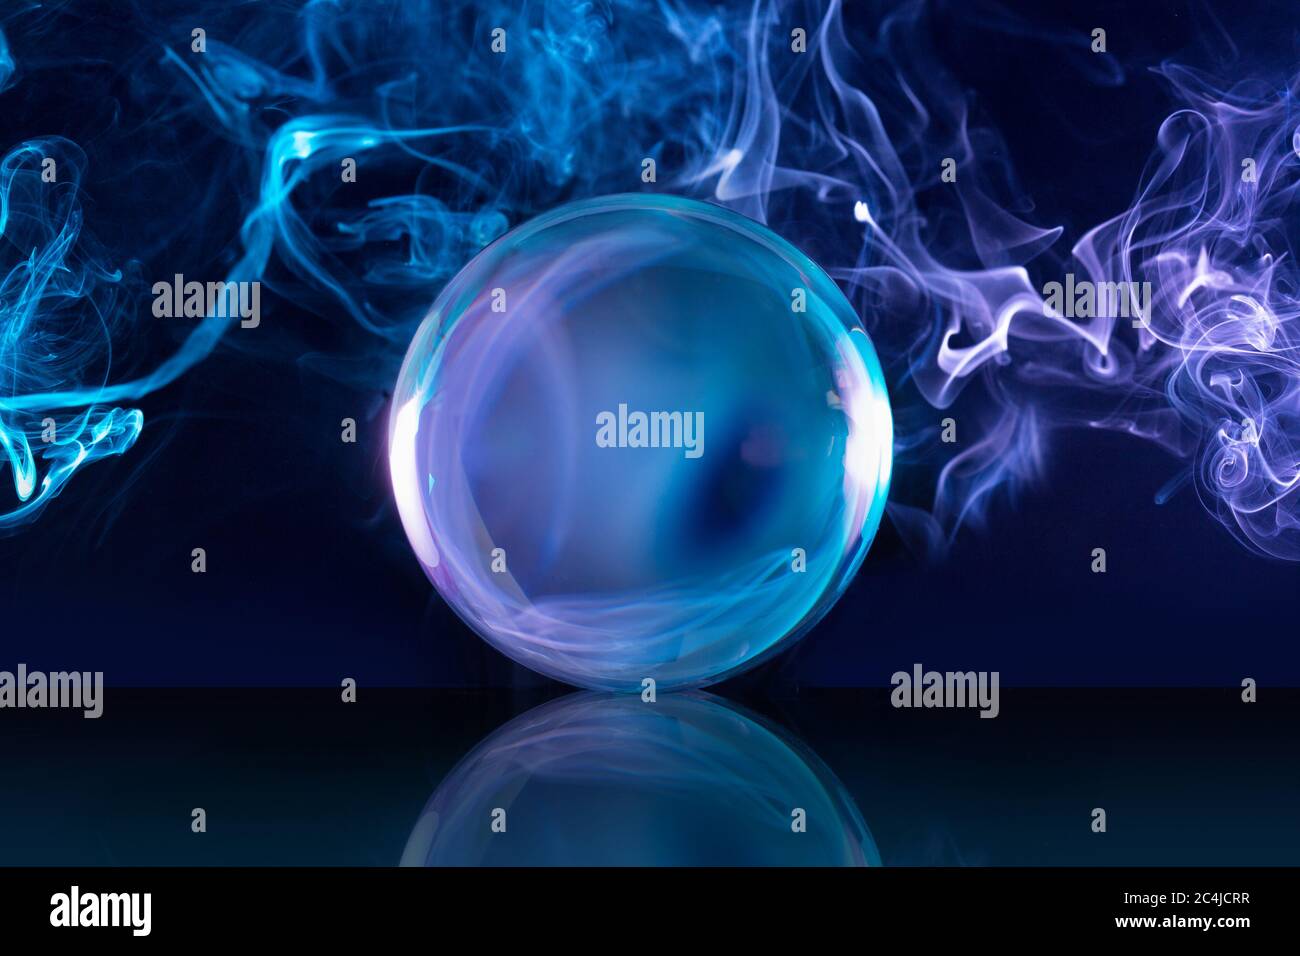 crystal ball in a dark blue smoky background Stock Photo